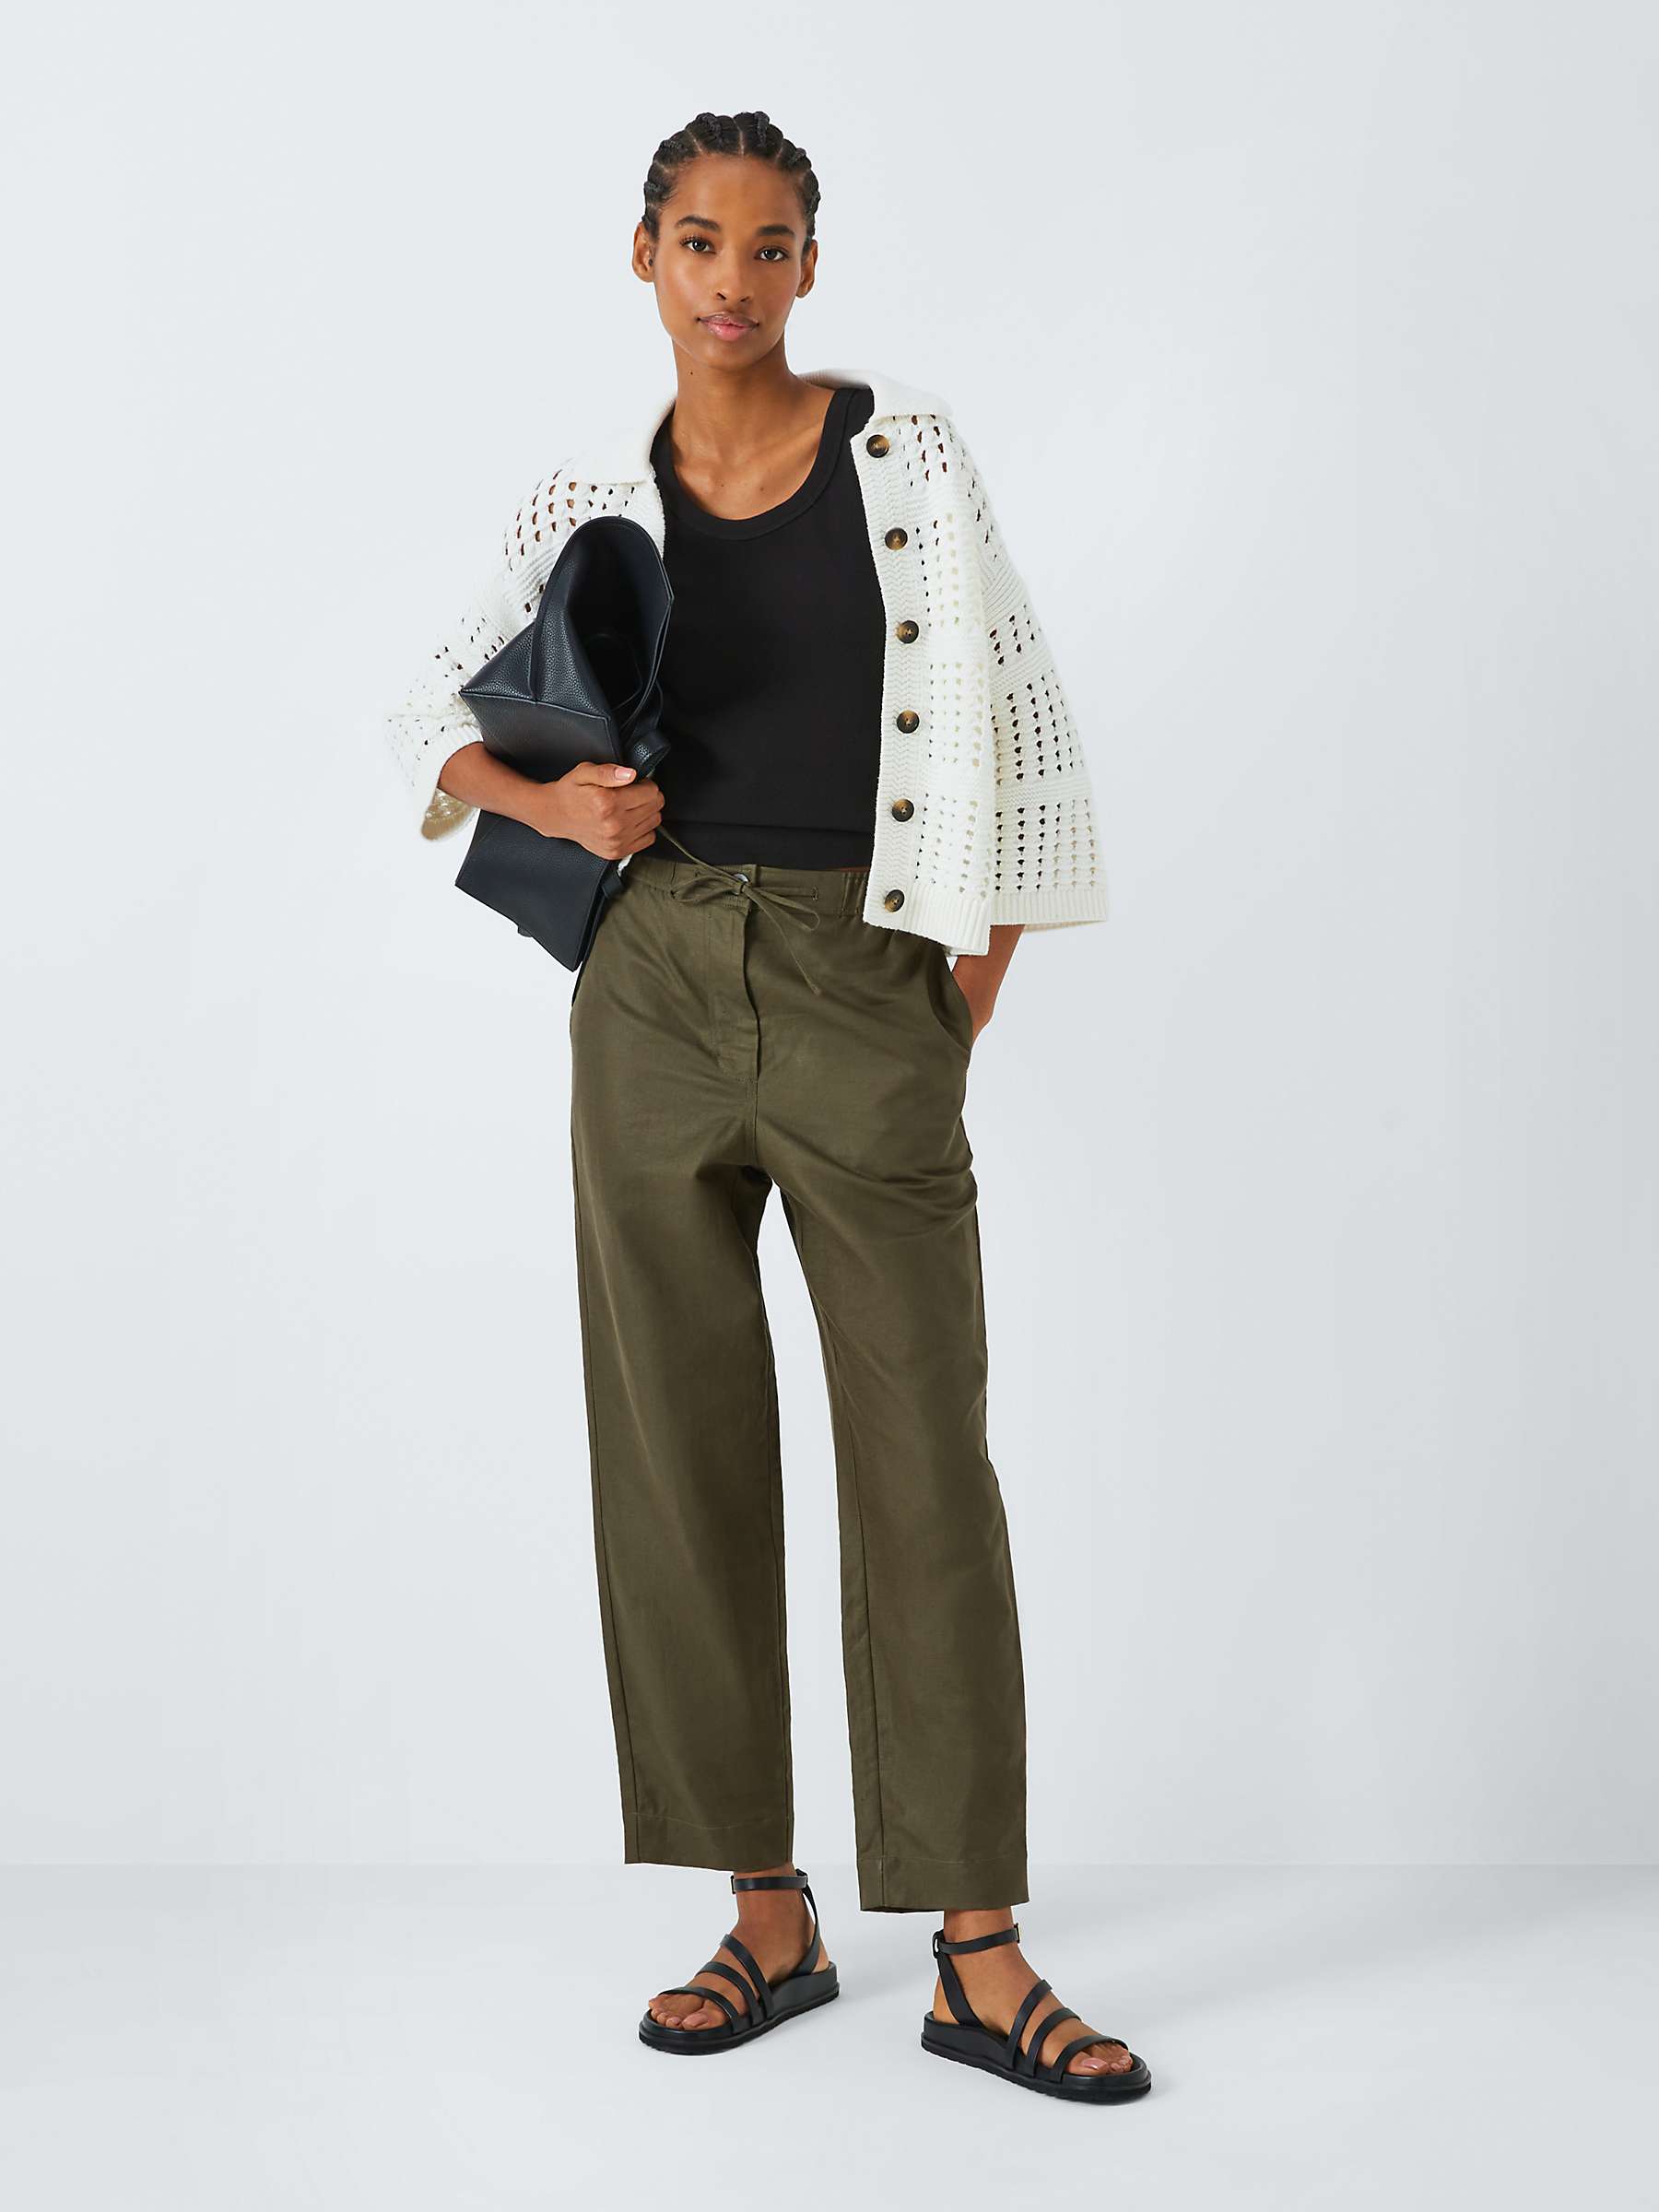 Buy John Lewis Cotton and Linen Blend Drawstring Trousers Online at johnlewis.com